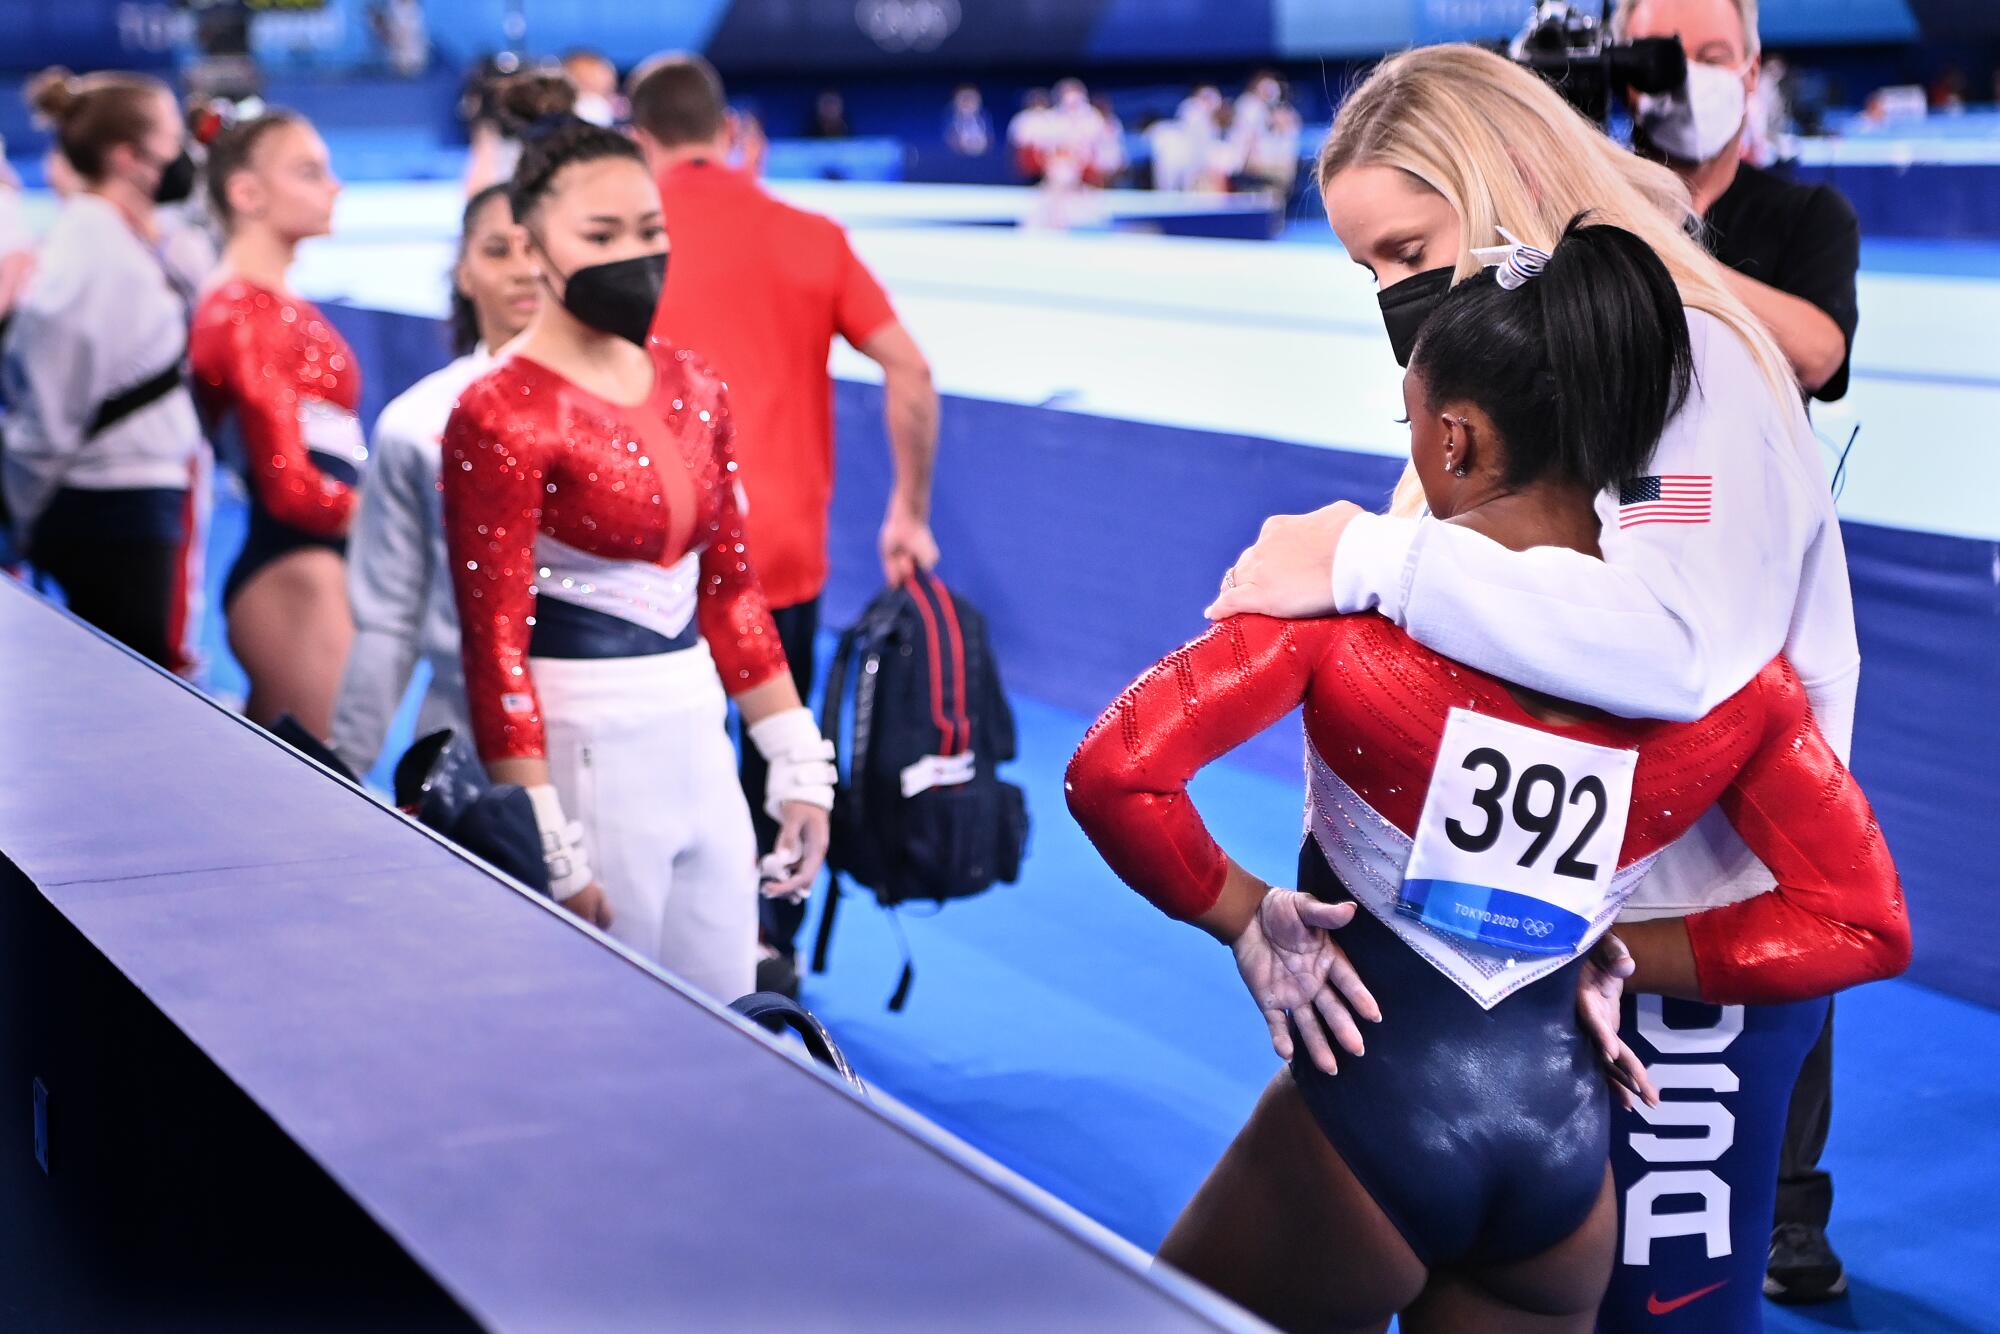 Gymnast Simone Biles is consoled after competing on the vault and later withdrawing from the women's gymnastics team final